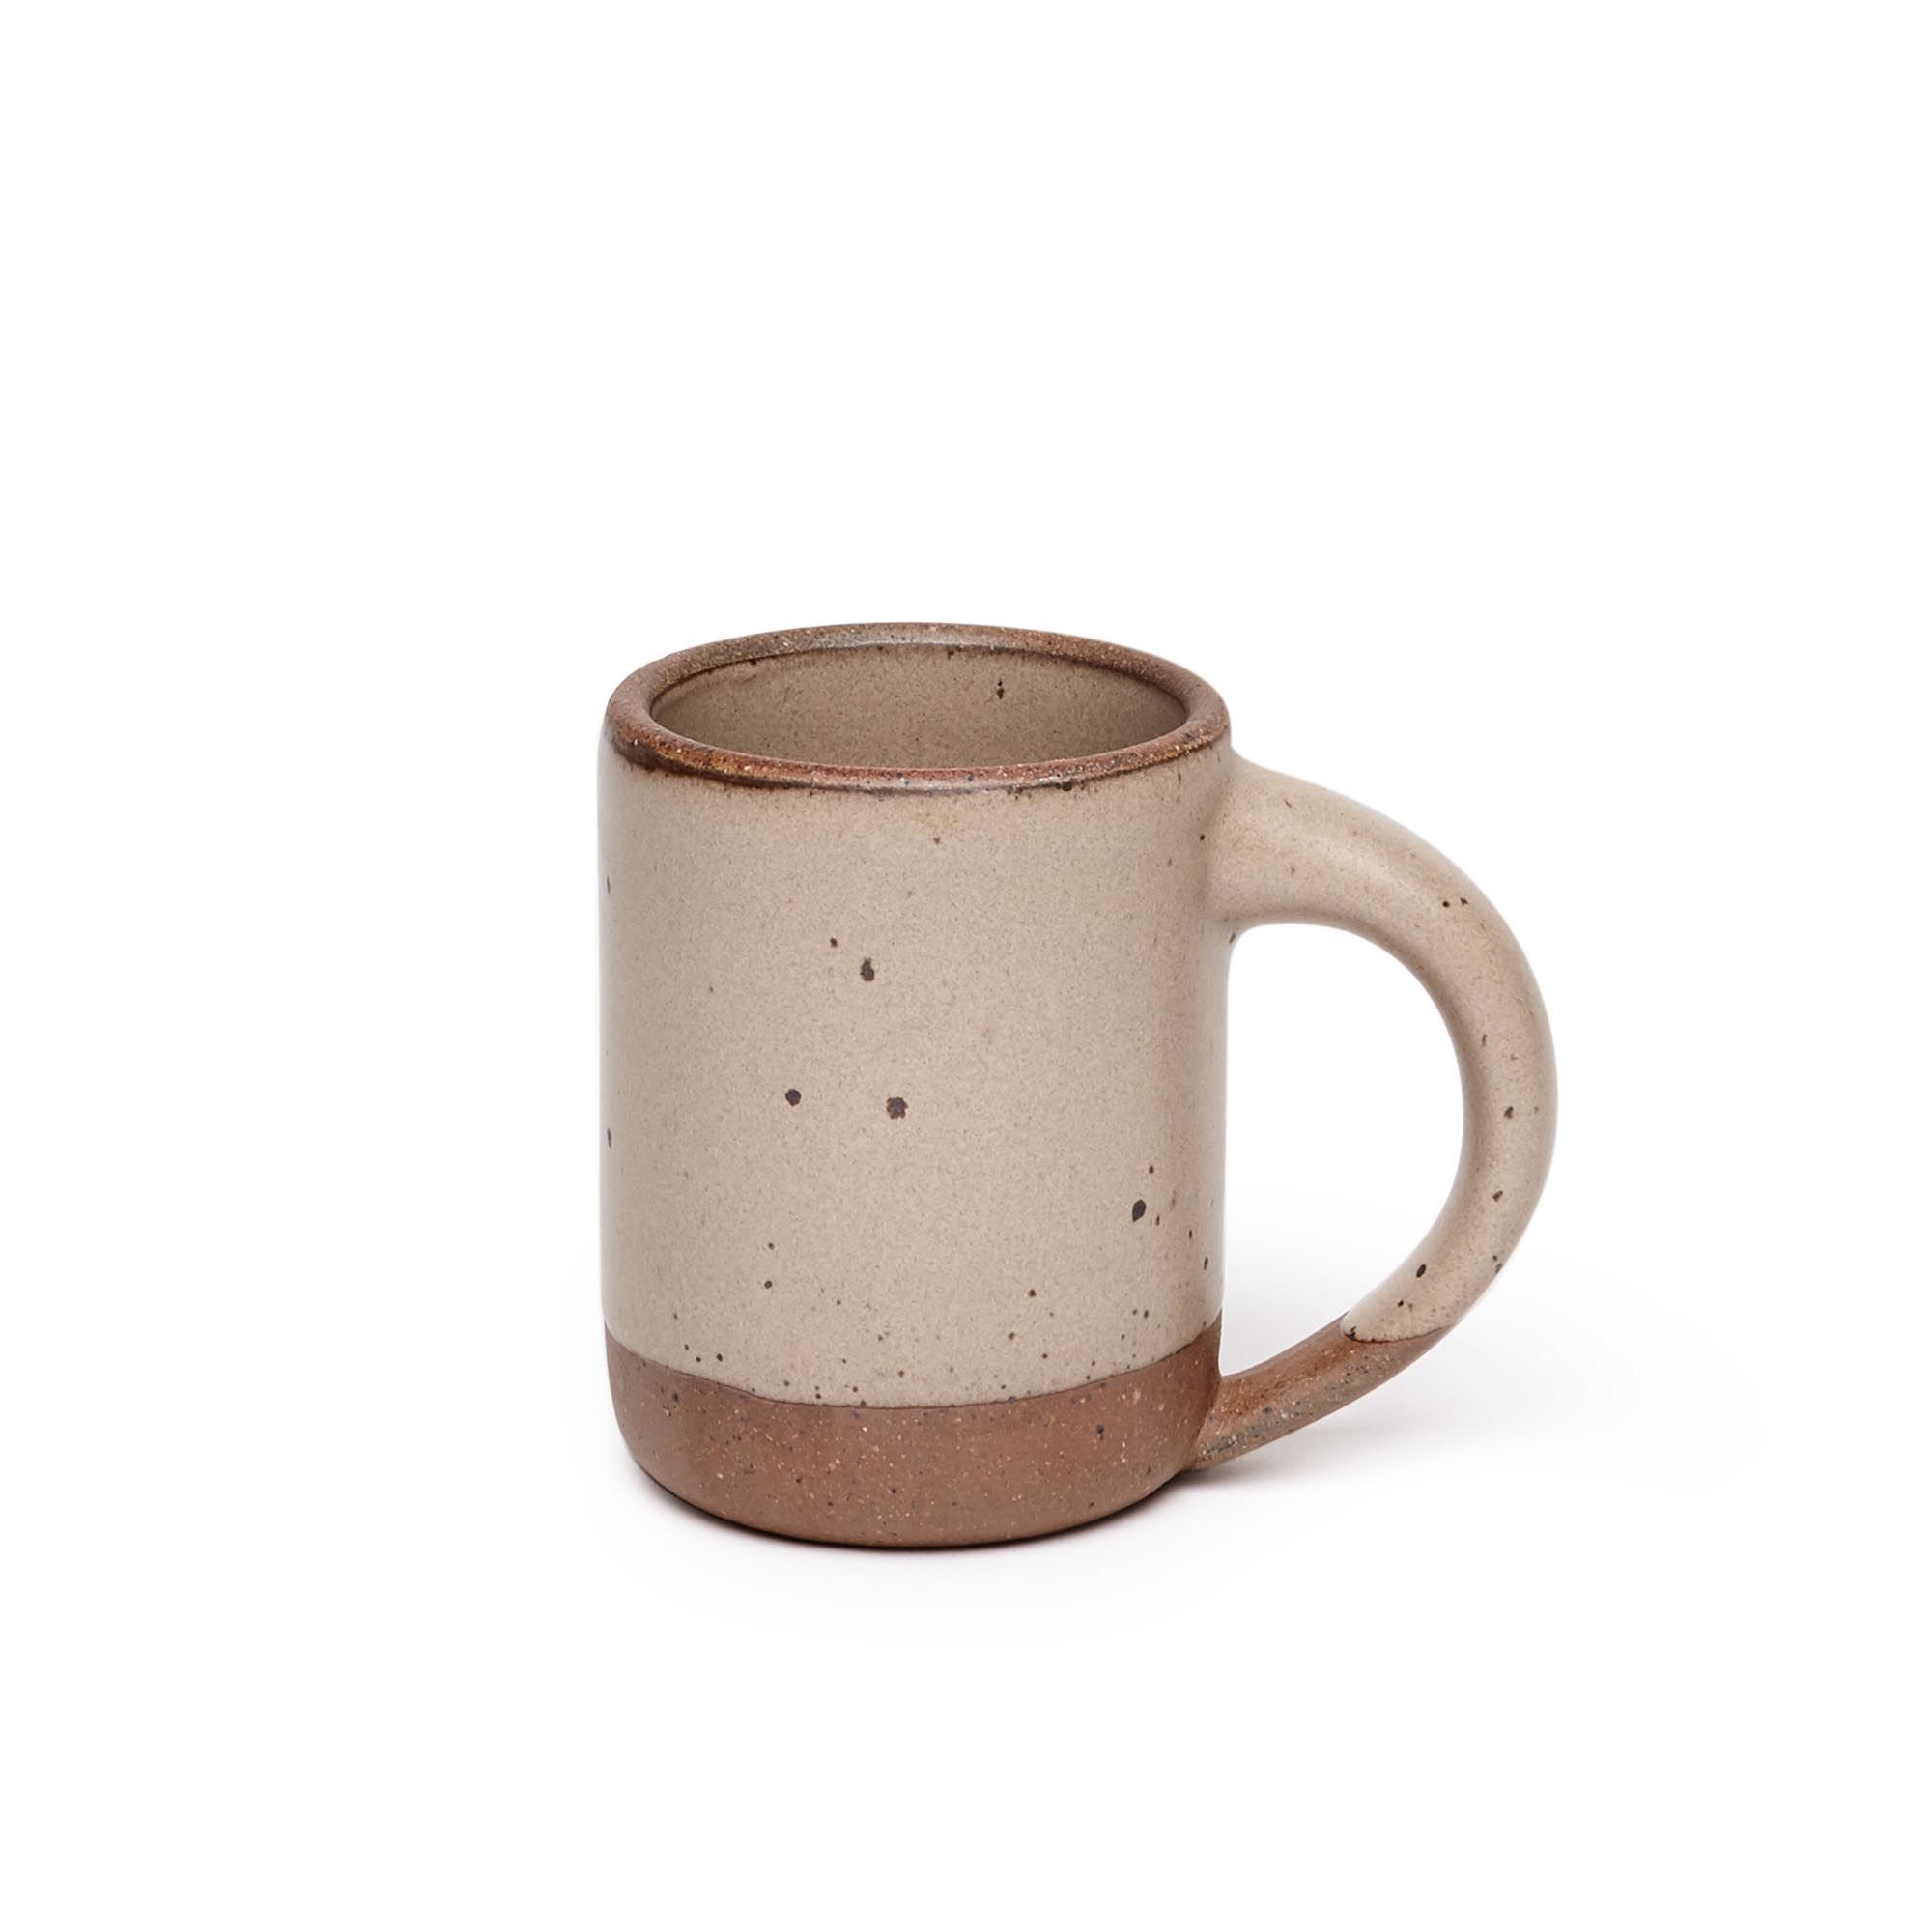 A medium sized ceramic mug with handle in a warm pale brown color featuring iron speckles and unglazed rim and bottom base.